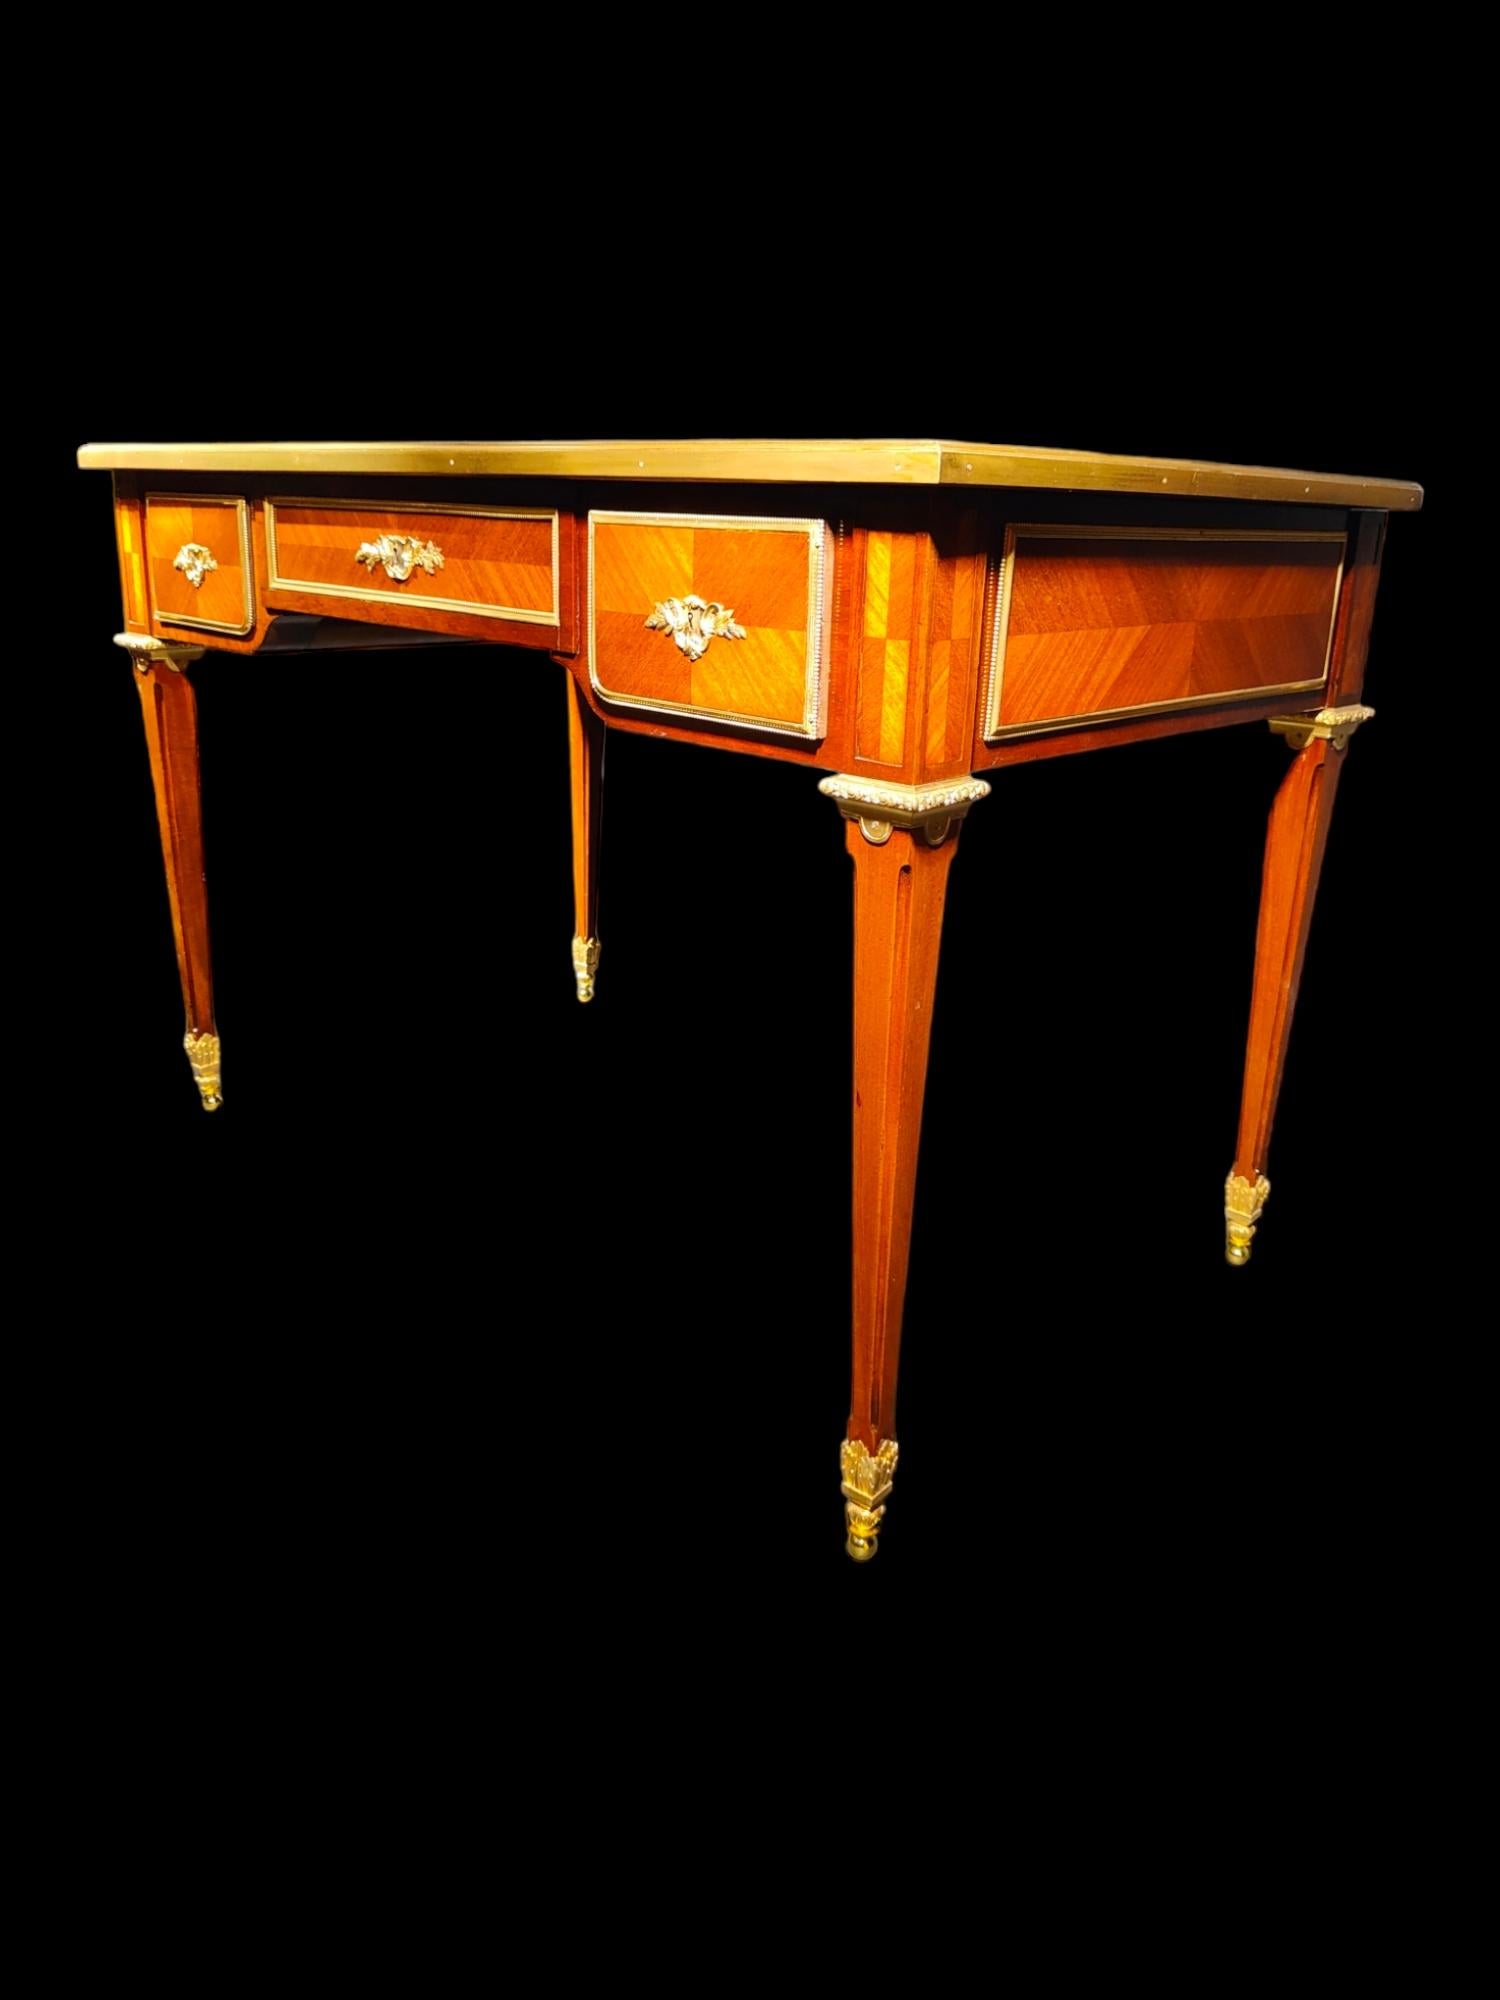 Very Fine Gilt Bronze Mounted Tulipwood and Amaranth Desk by L. Cueunieres For Sale 2